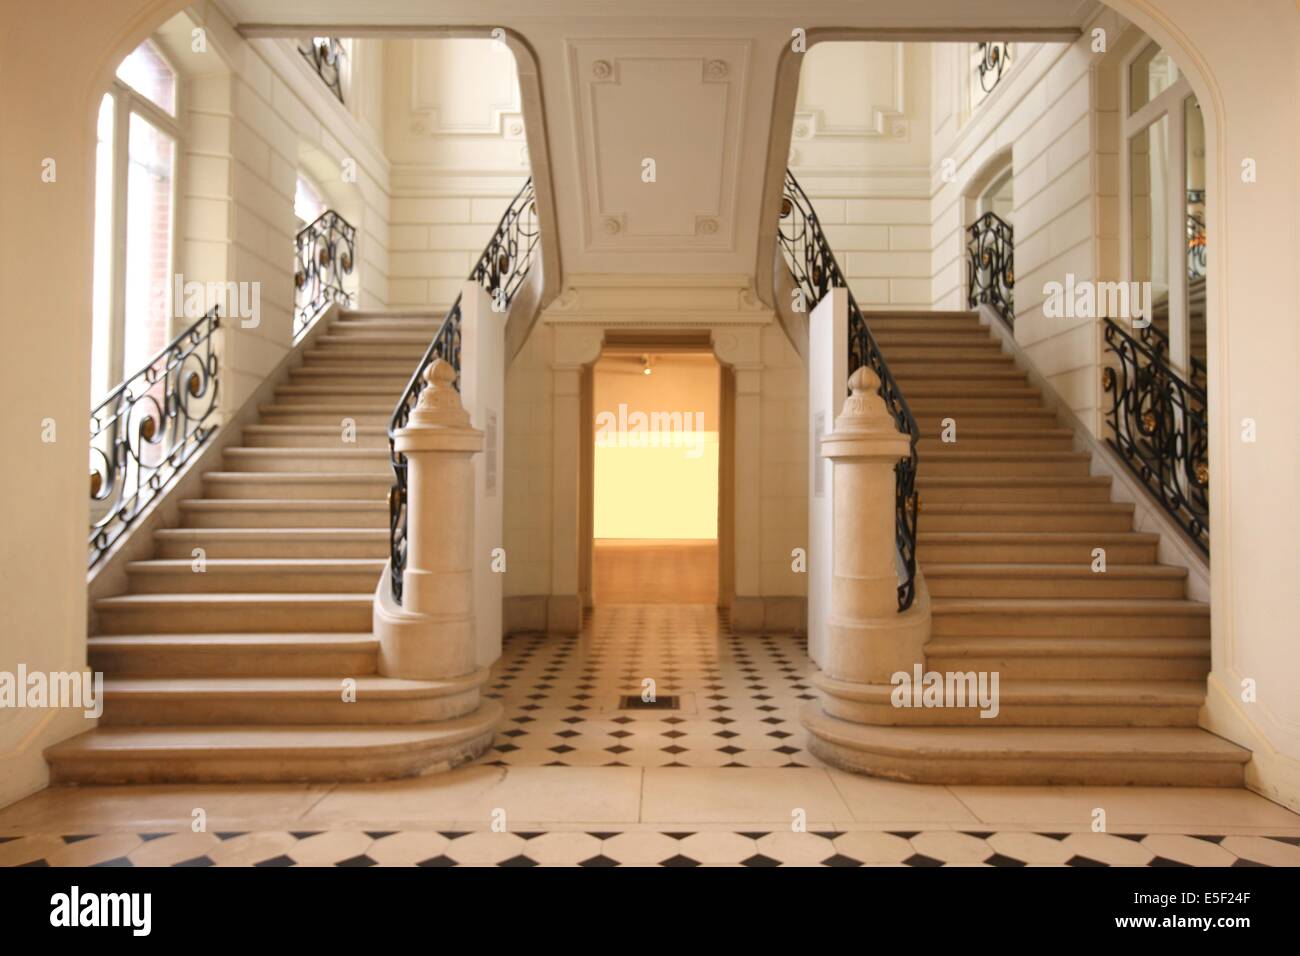 France, Haute Normandie, eure, louviers, musee municipal, grand escalier, hall, Stock Photo